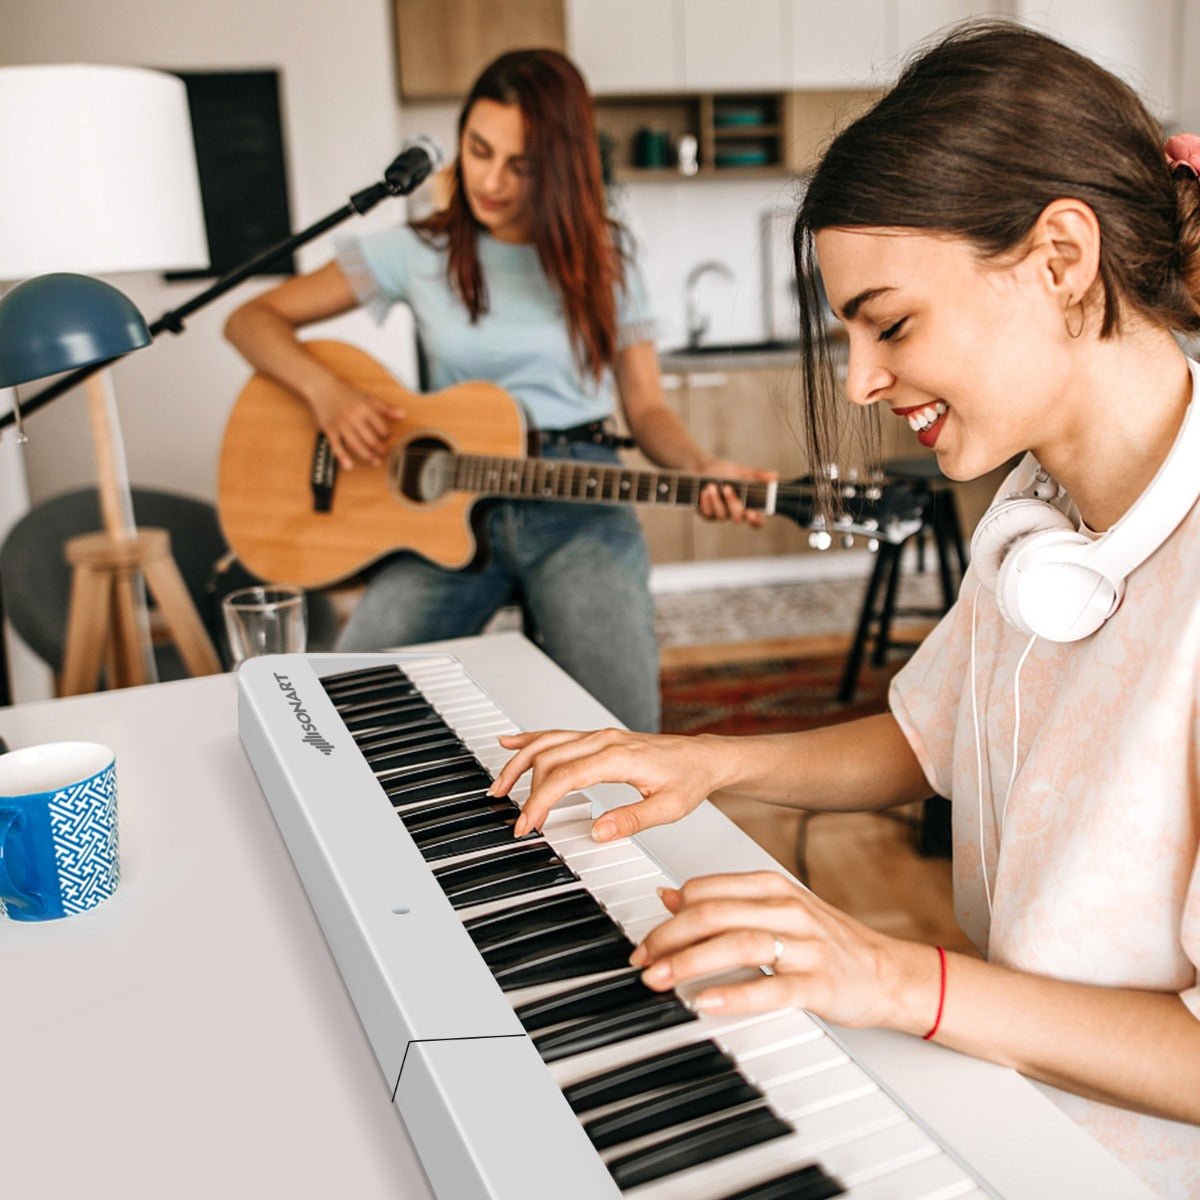 Get the 88-Key Foldable Digital Piano with Wireless BT & Bag in White